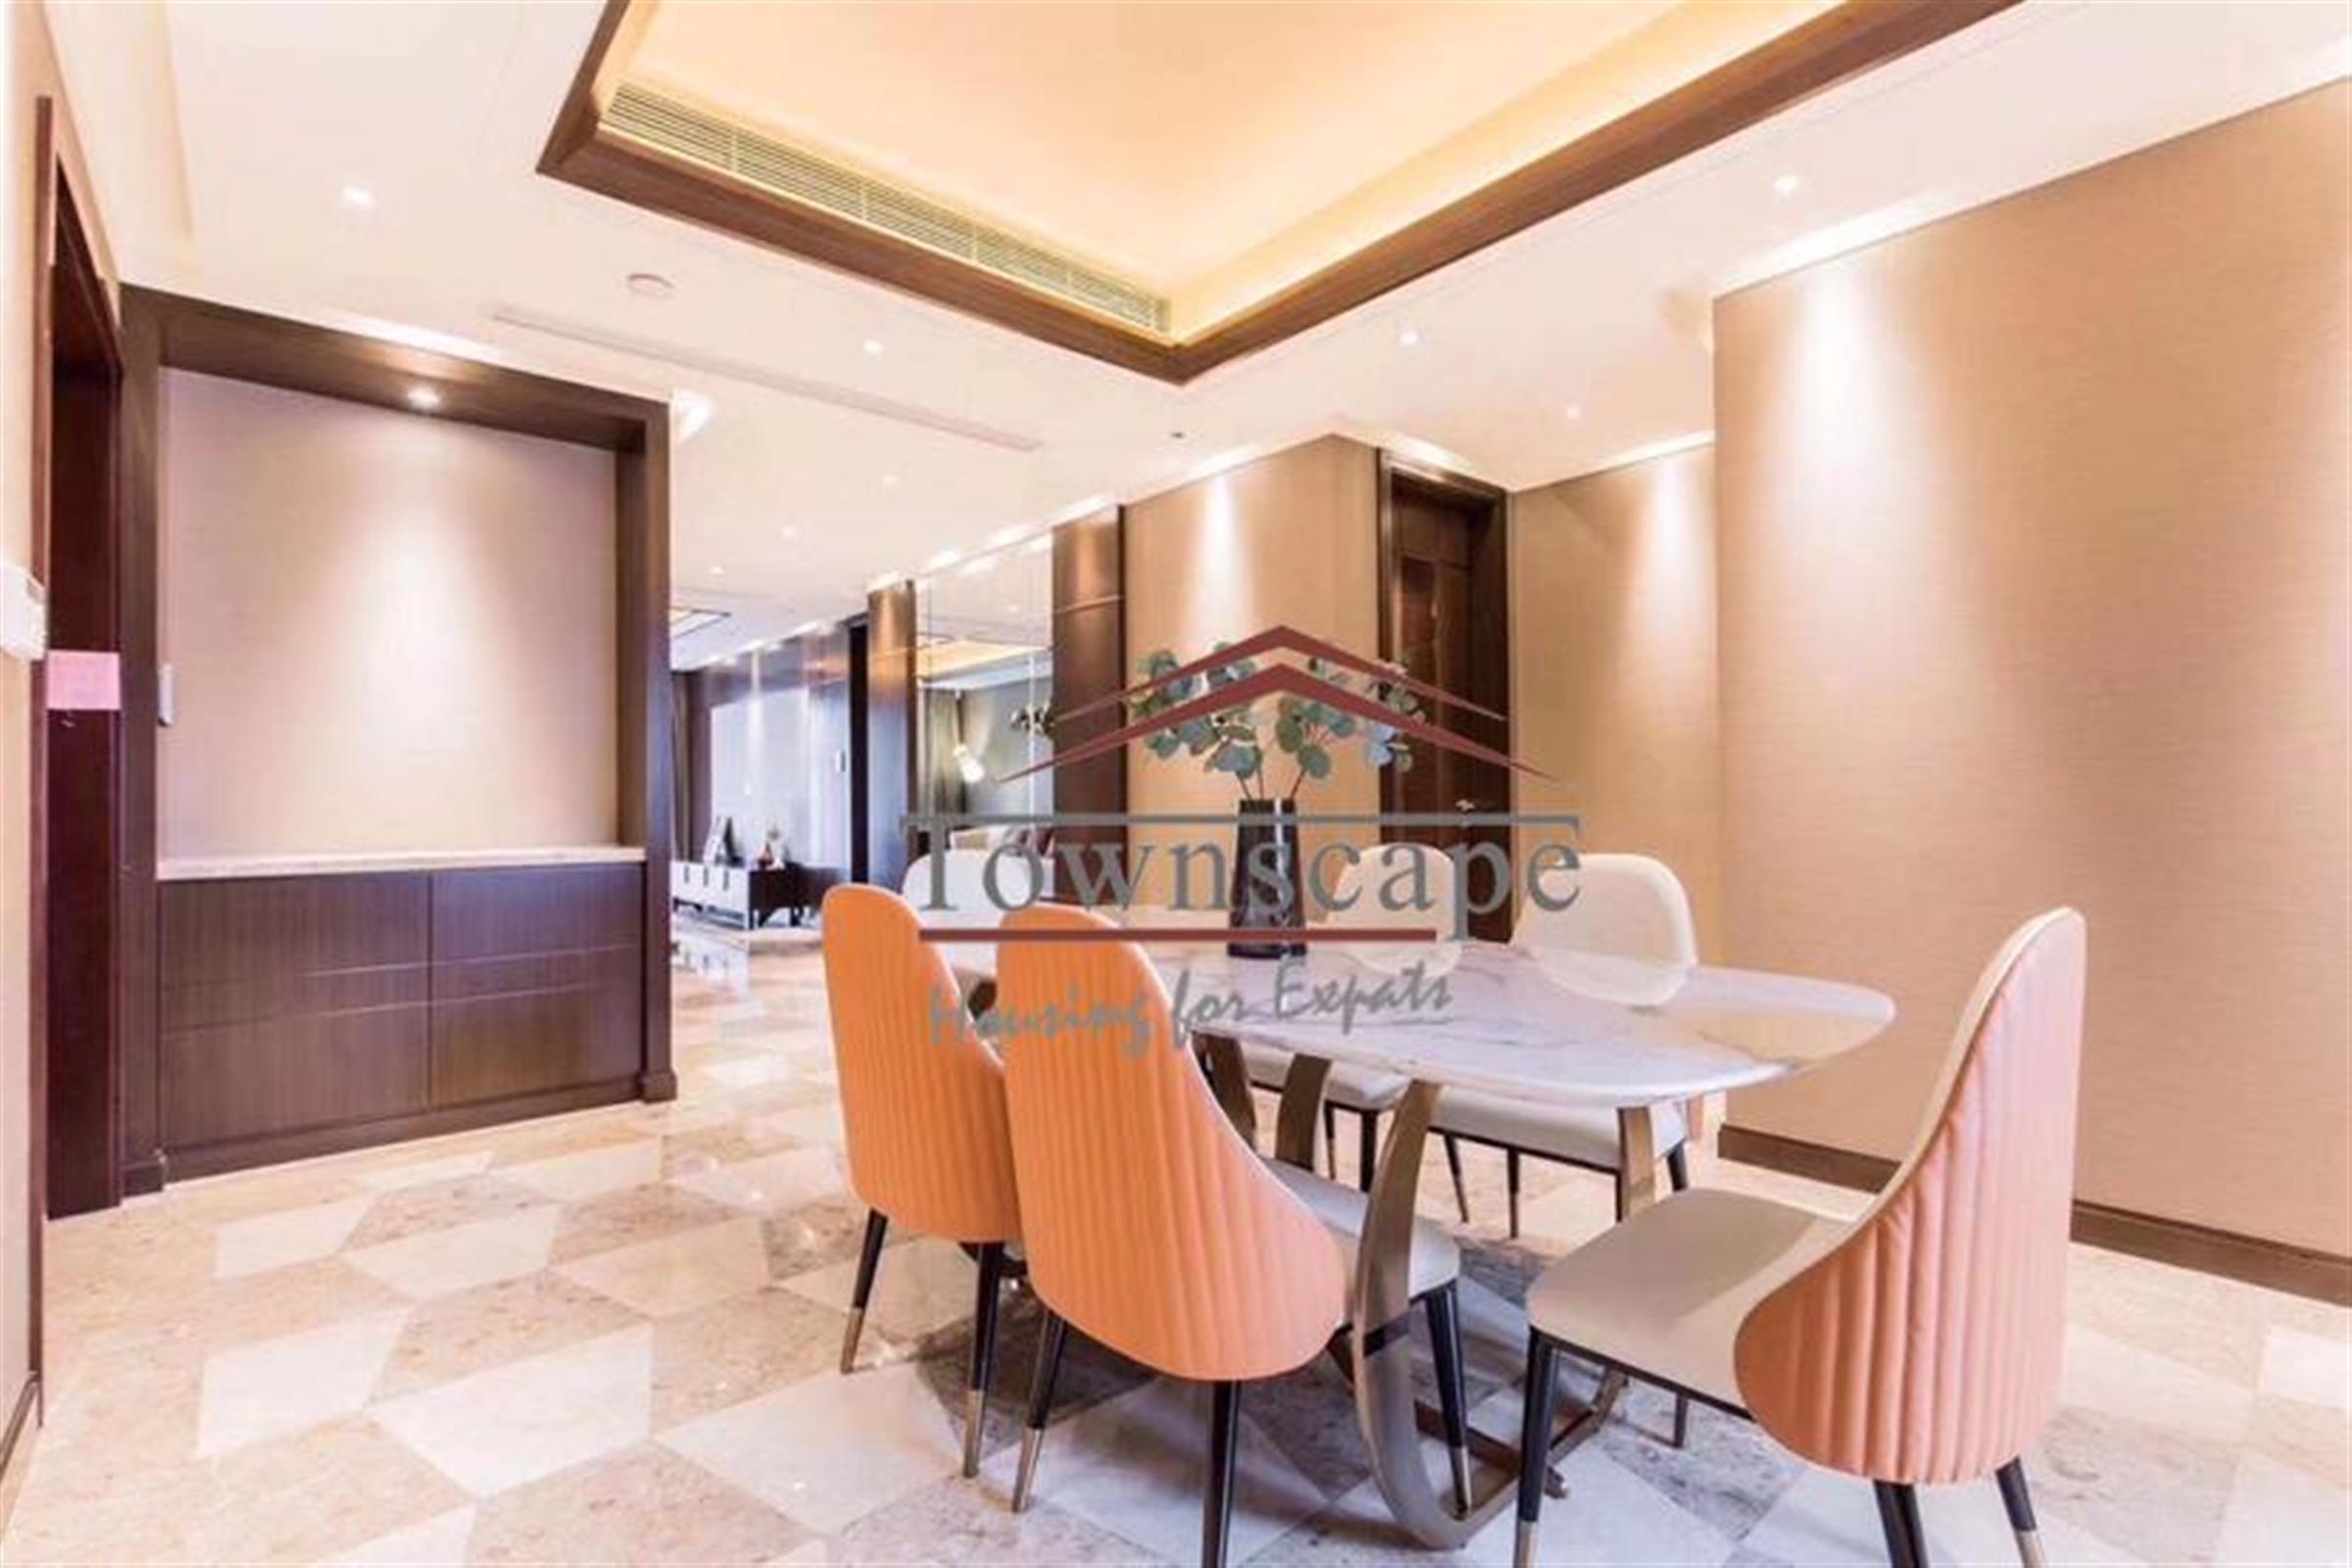 Semi-private dining area Luxury New Spacious Xintiandi Apartment for Rent in Shanghai